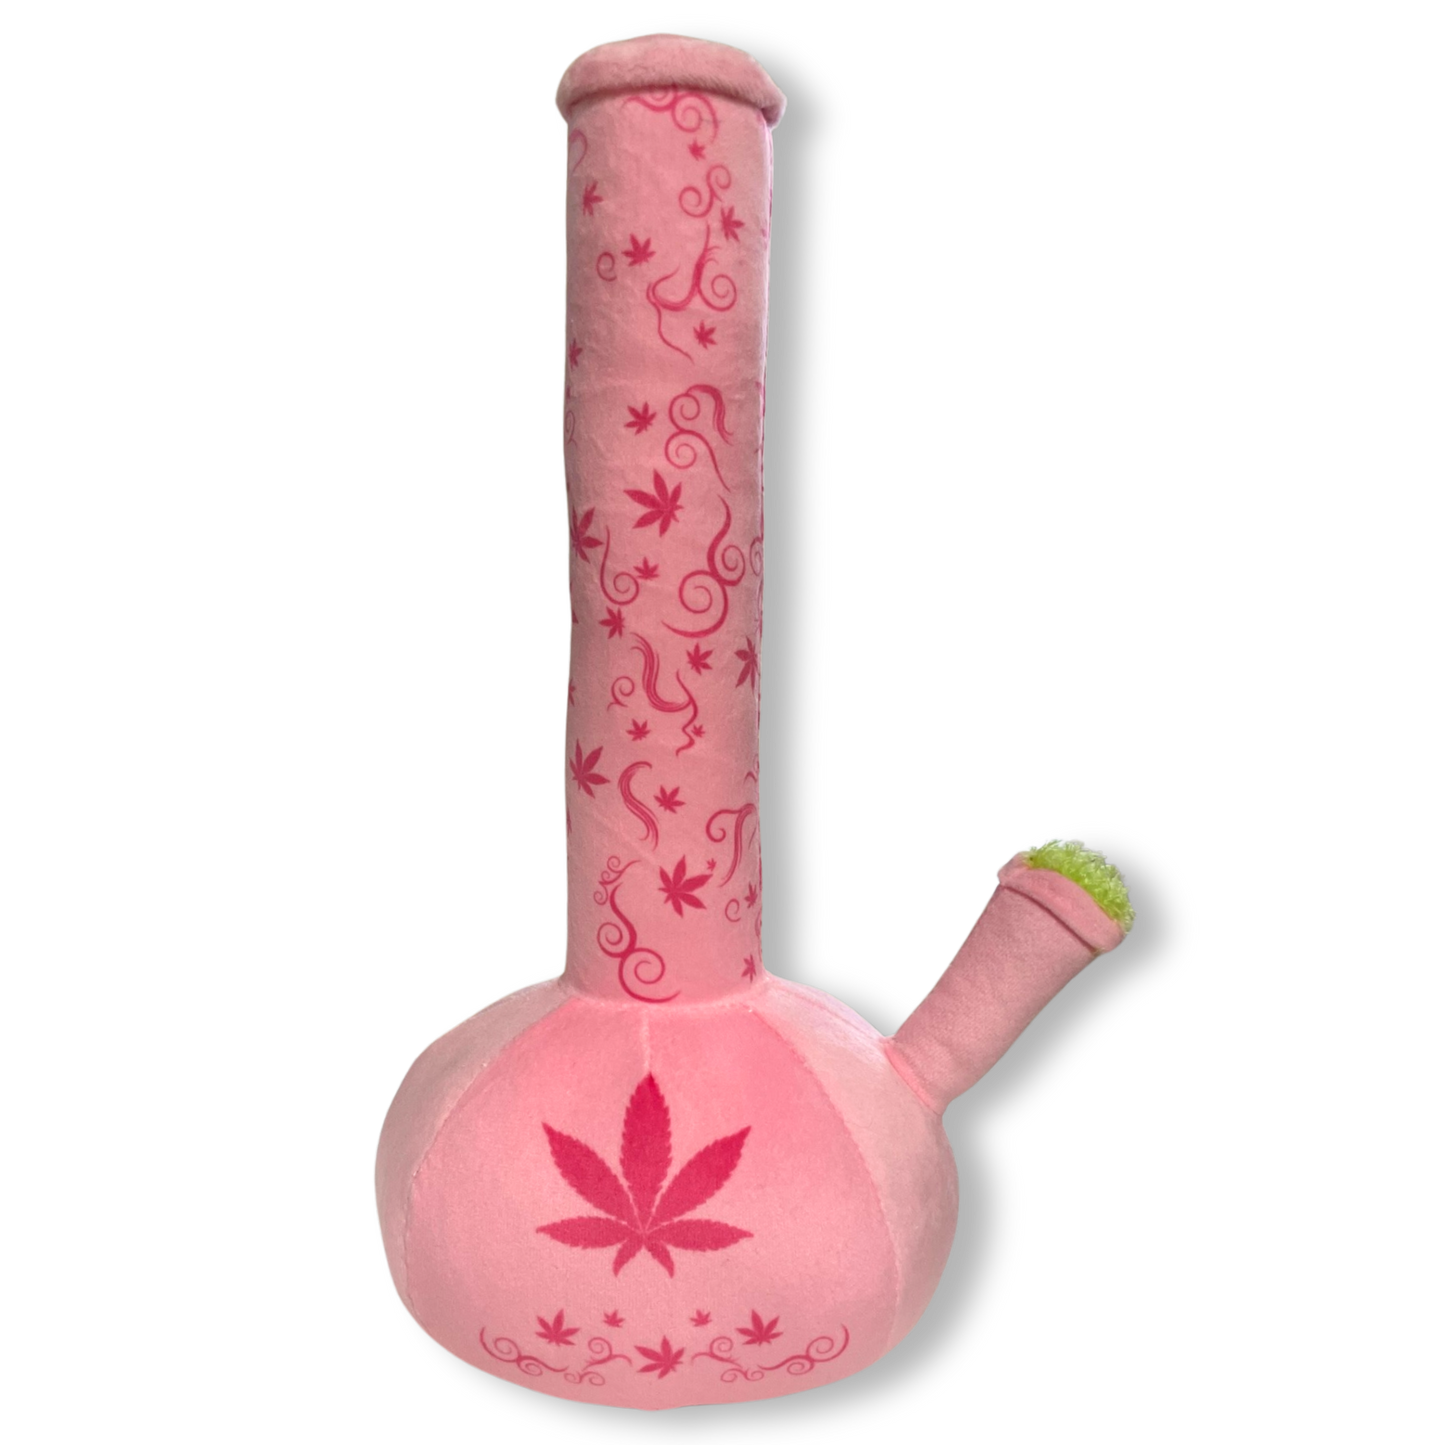 Harmony Bong Cool Plush Squeaky Toy